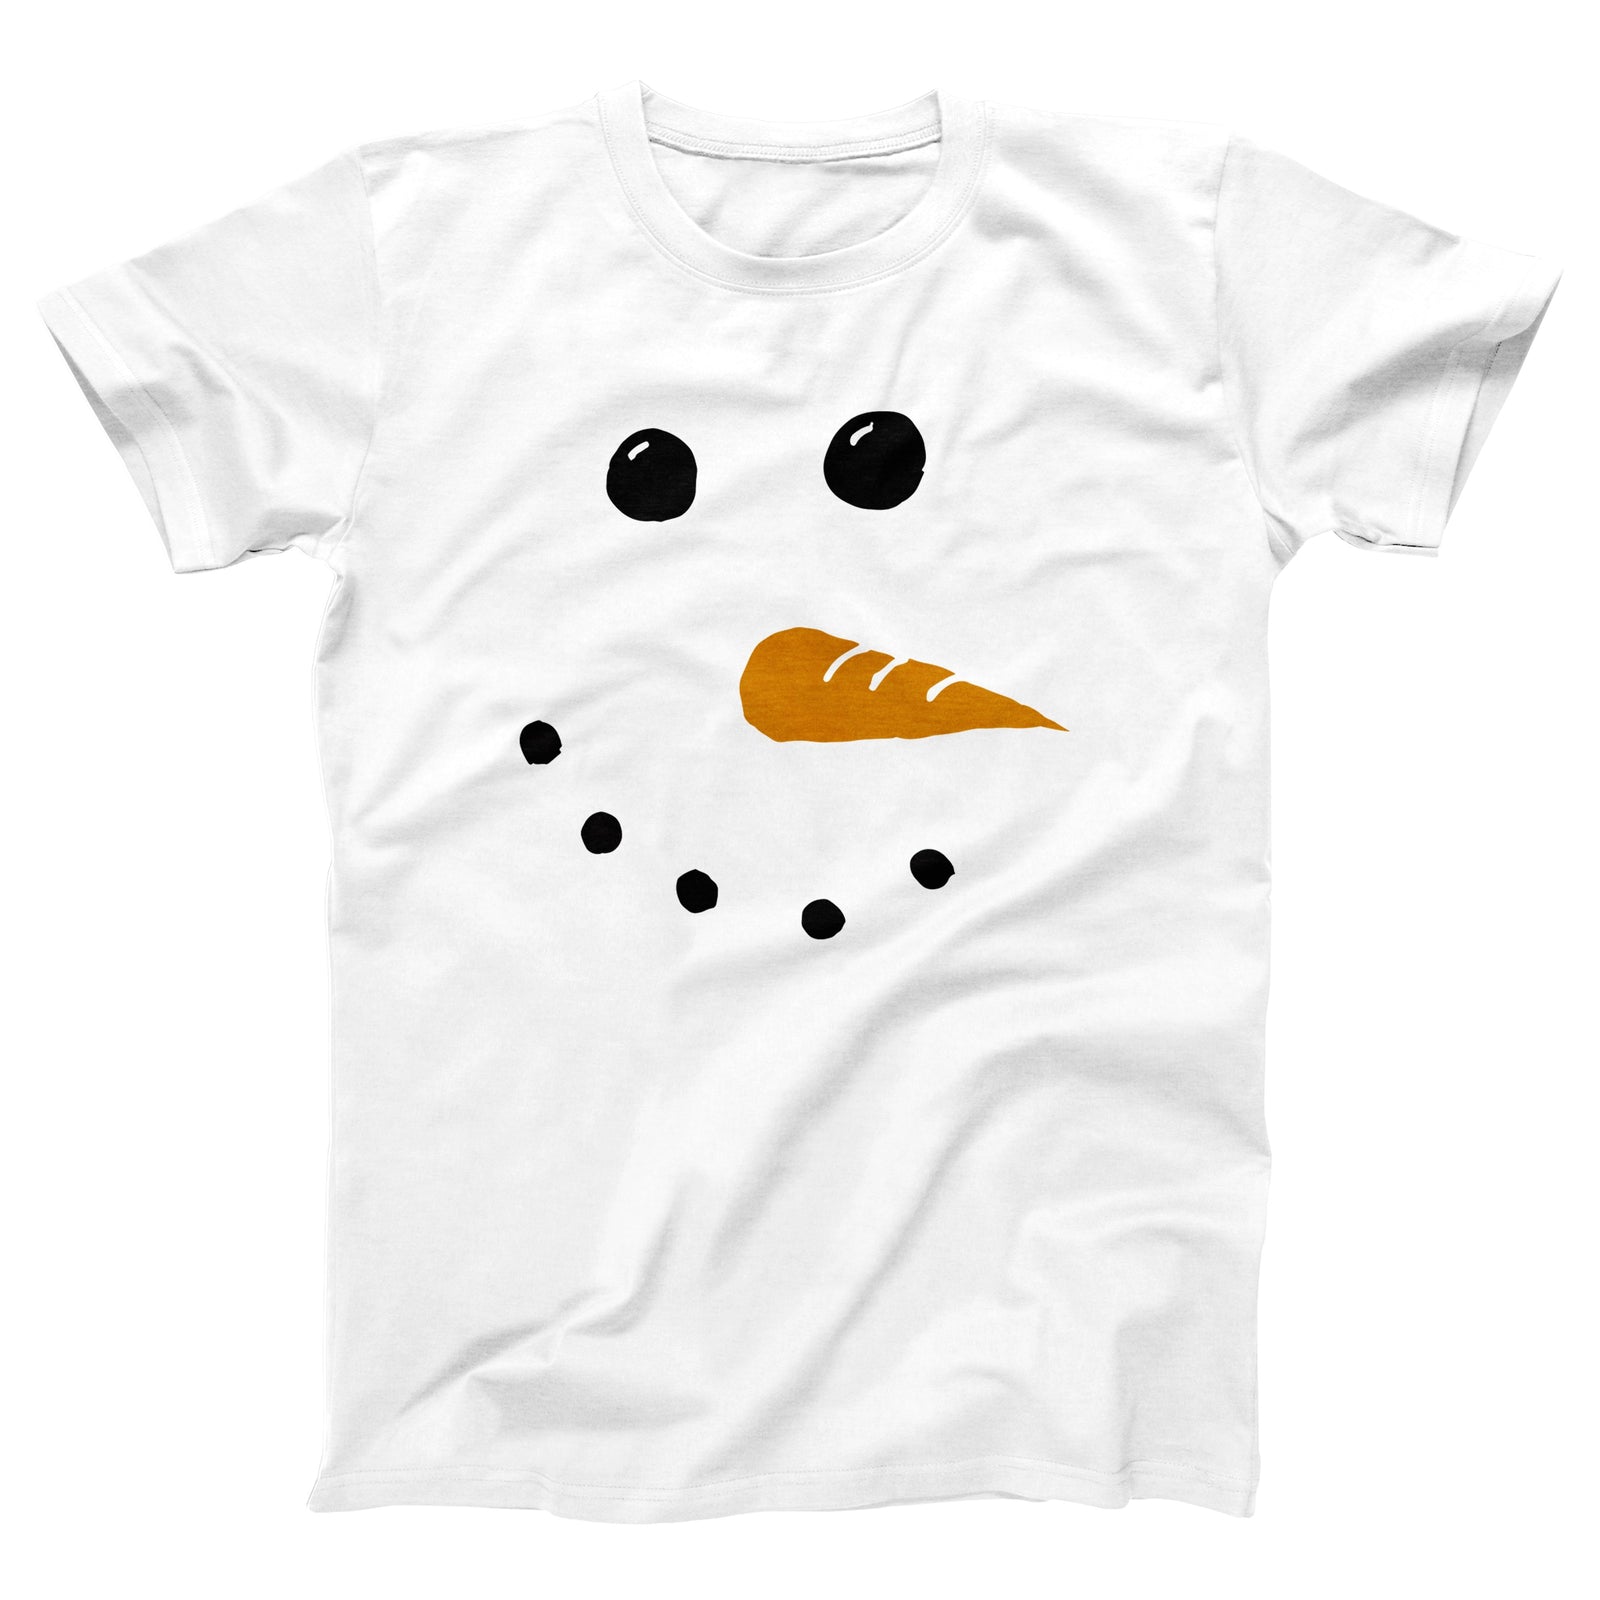 //cdn.shopify.com/s/files/1/0274/2488/2766/products/snowman-menunisex-t-shirt-313040_5000x.jpg?v=1605520070 5000w,
    //cdn.shopify.com/s/files/1/0274/2488/2766/products/snowman-menunisex-t-shirt-313040_4500x.jpg?v=1605520070 4500w,
    //cdn.shopify.com/s/files/1/0274/2488/2766/products/snowman-menunisex-t-shirt-313040_4000x.jpg?v=1605520070 4000w,
    //cdn.shopify.com/s/files/1/0274/2488/2766/products/snowman-menunisex-t-shirt-313040_3500x.jpg?v=1605520070 3500w,
    //cdn.shopify.com/s/files/1/0274/2488/2766/products/snowman-menunisex-t-shirt-313040_3000x.jpg?v=1605520070 3000w,
    //cdn.shopify.com/s/files/1/0274/2488/2766/products/snowman-menunisex-t-shirt-313040_2500x.jpg?v=1605520070 2500w,
    //cdn.shopify.com/s/files/1/0274/2488/2766/products/snowman-menunisex-t-shirt-313040_2000x.jpg?v=1605520070 2000w,
    //cdn.shopify.com/s/files/1/0274/2488/2766/products/snowman-menunisex-t-shirt-313040_1800x.jpg?v=1605520070 1800w,
    //cdn.shopify.com/s/files/1/0274/2488/2766/products/snowman-menunisex-t-shirt-313040_1600x.jpg?v=1605520070 1600w,
    //cdn.shopify.com/s/files/1/0274/2488/2766/products/snowman-menunisex-t-shirt-313040_1400x.jpg?v=1605520070 1400w,
    //cdn.shopify.com/s/files/1/0274/2488/2766/products/snowman-menunisex-t-shirt-313040_1200x.jpg?v=1605520070 1200w,
    //cdn.shopify.com/s/files/1/0274/2488/2766/products/snowman-menunisex-t-shirt-313040_1000x.jpg?v=1605520070 1000w,
    //cdn.shopify.com/s/files/1/0274/2488/2766/products/snowman-menunisex-t-shirt-313040_800x.jpg?v=1605520070 800w,
    //cdn.shopify.com/s/files/1/0274/2488/2766/products/snowman-menunisex-t-shirt-313040_600x.jpg?v=1605520070 600w,
    //cdn.shopify.com/s/files/1/0274/2488/2766/products/snowman-menunisex-t-shirt-313040_400x.jpg?v=1605520070 400w,
    //cdn.shopify.com/s/files/1/0274/2488/2766/products/snowman-menunisex-t-shirt-313040_200x.jpg?v=1605520070 200w